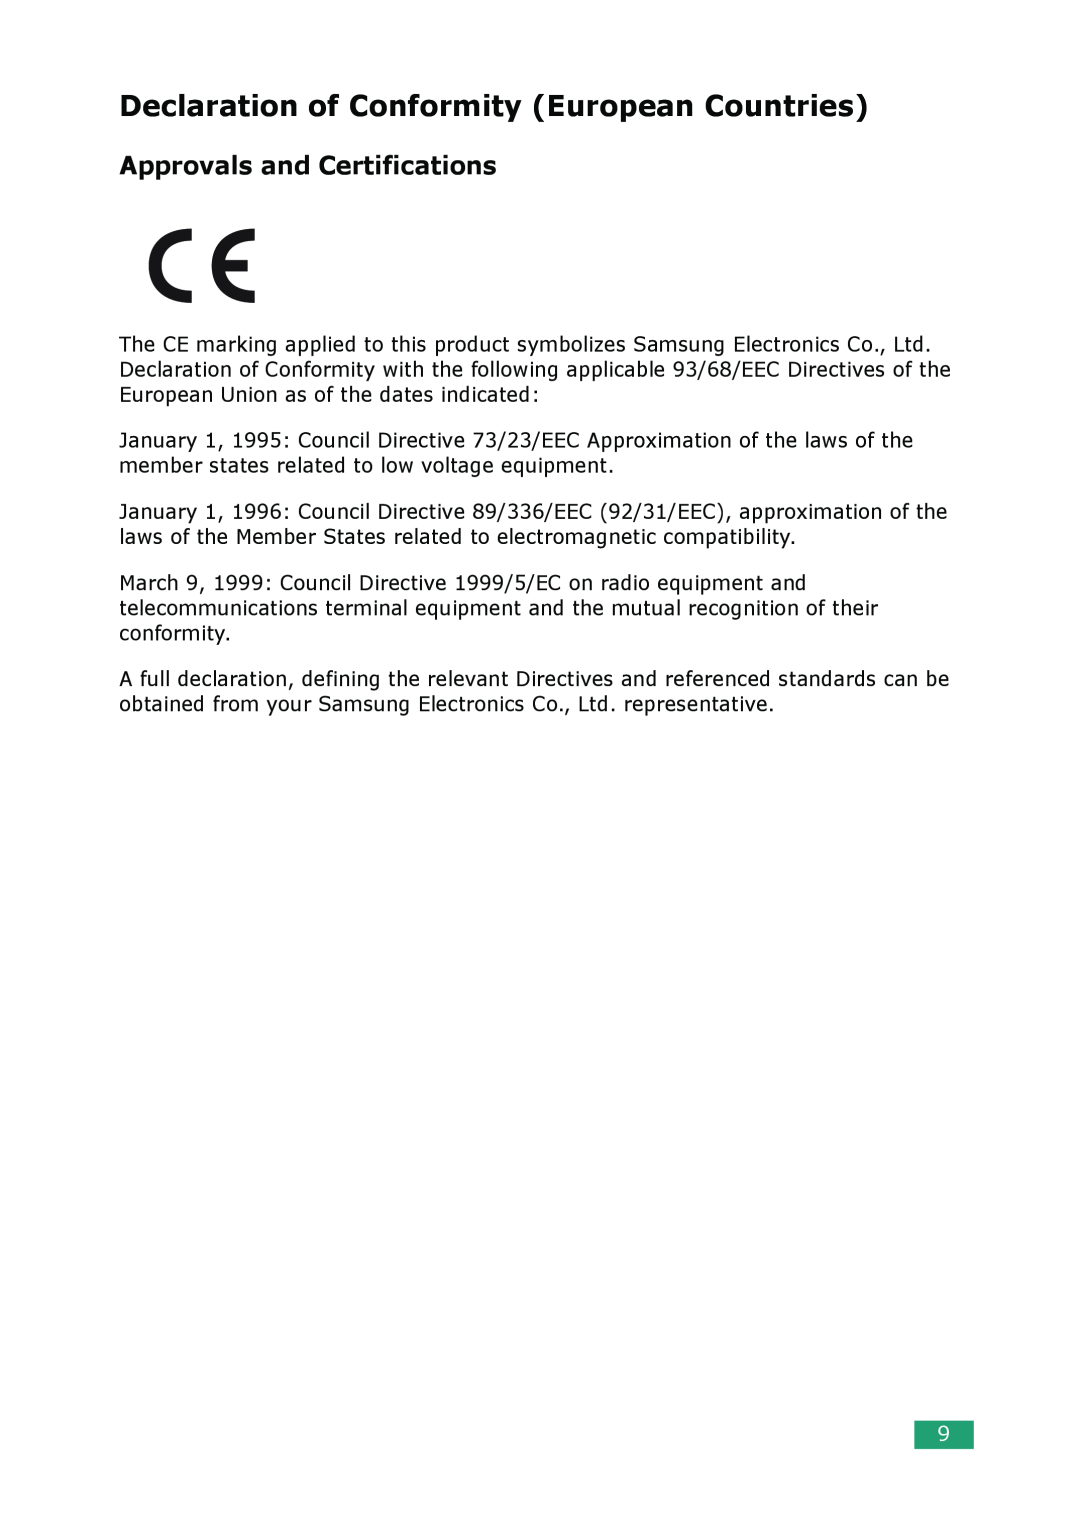 Samsung ML-1610 manual Declaration of Conformity European Countries, Approvals and Certifications 